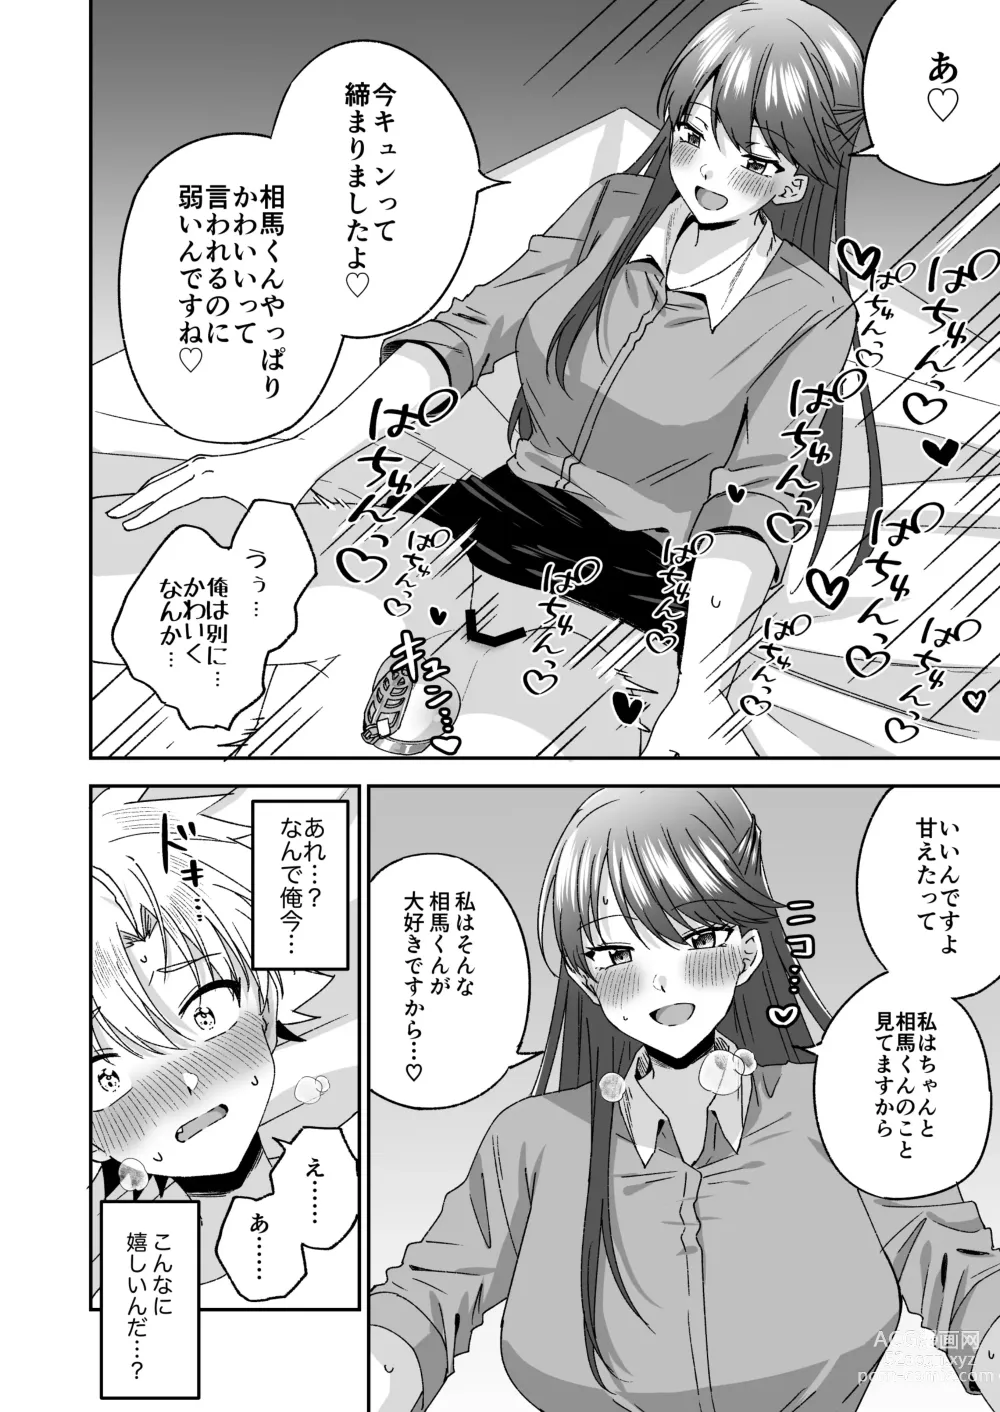 Page 35 of doujinshi A story about a delinquent boy who gets chastity belt ejaculation control reverse anal sex by a female teacher who is a nymphomaniac